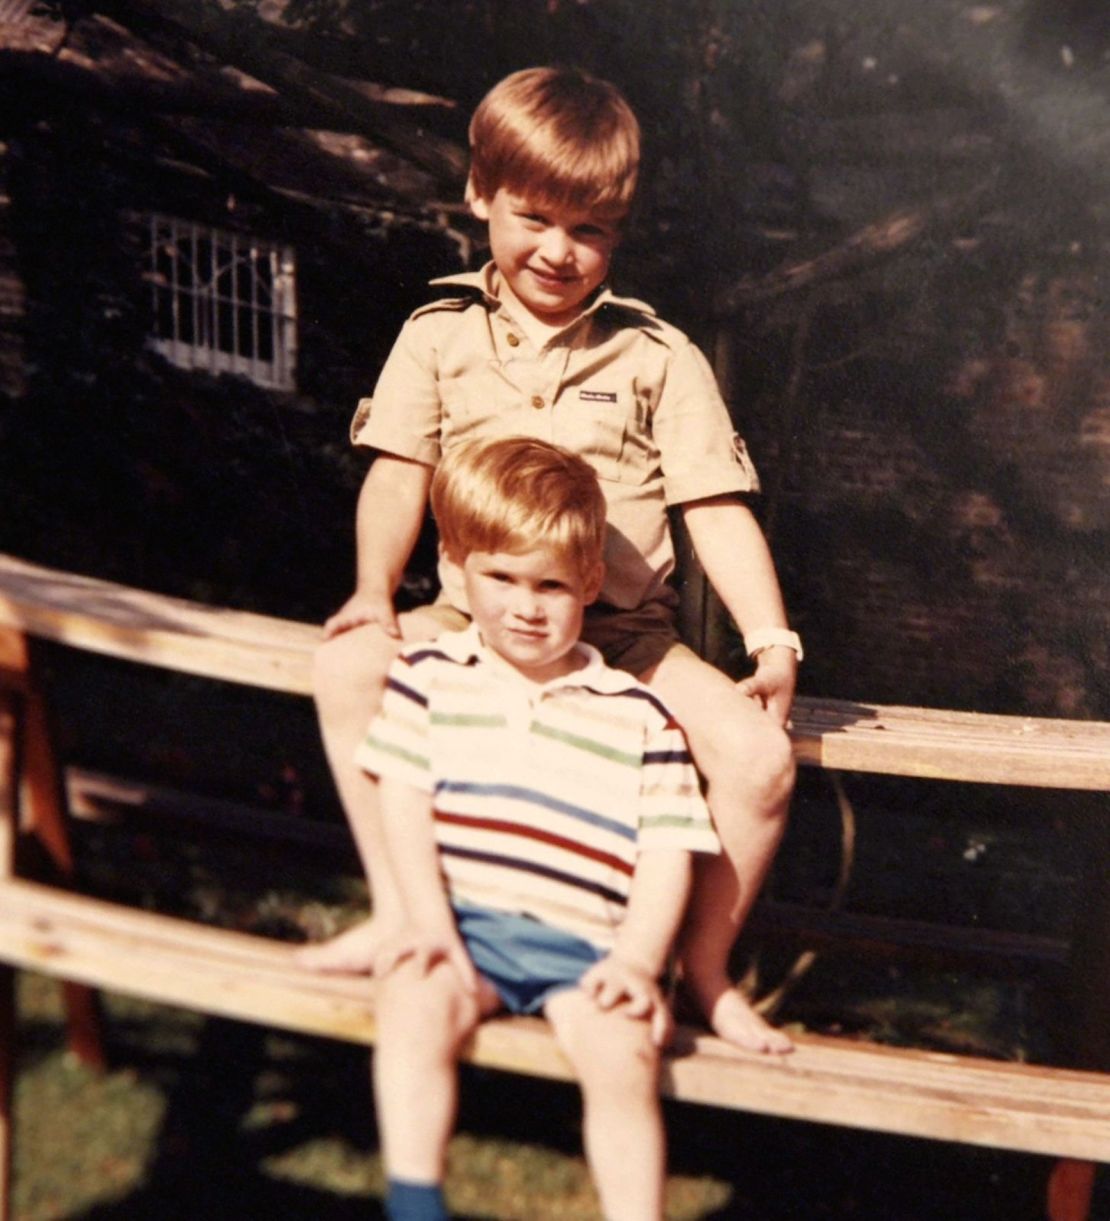 Princes William and Harry said their last conversation with their mother, Princess Diana, had been brief.